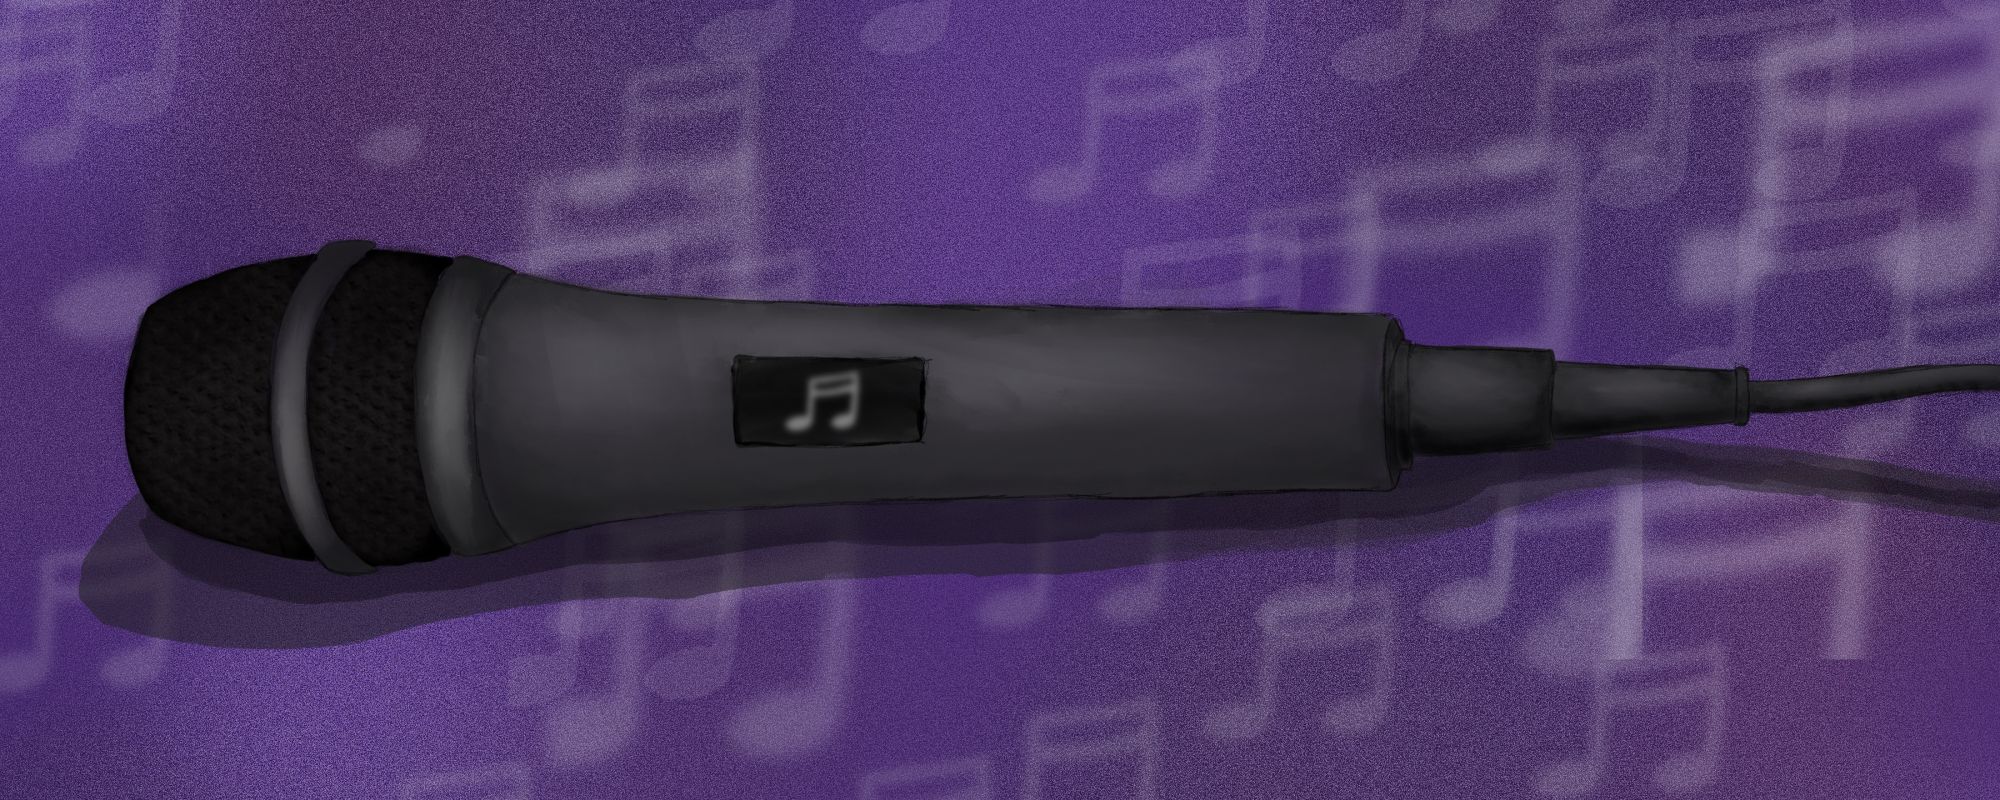 A black microphone on a purple background filled with music notes  